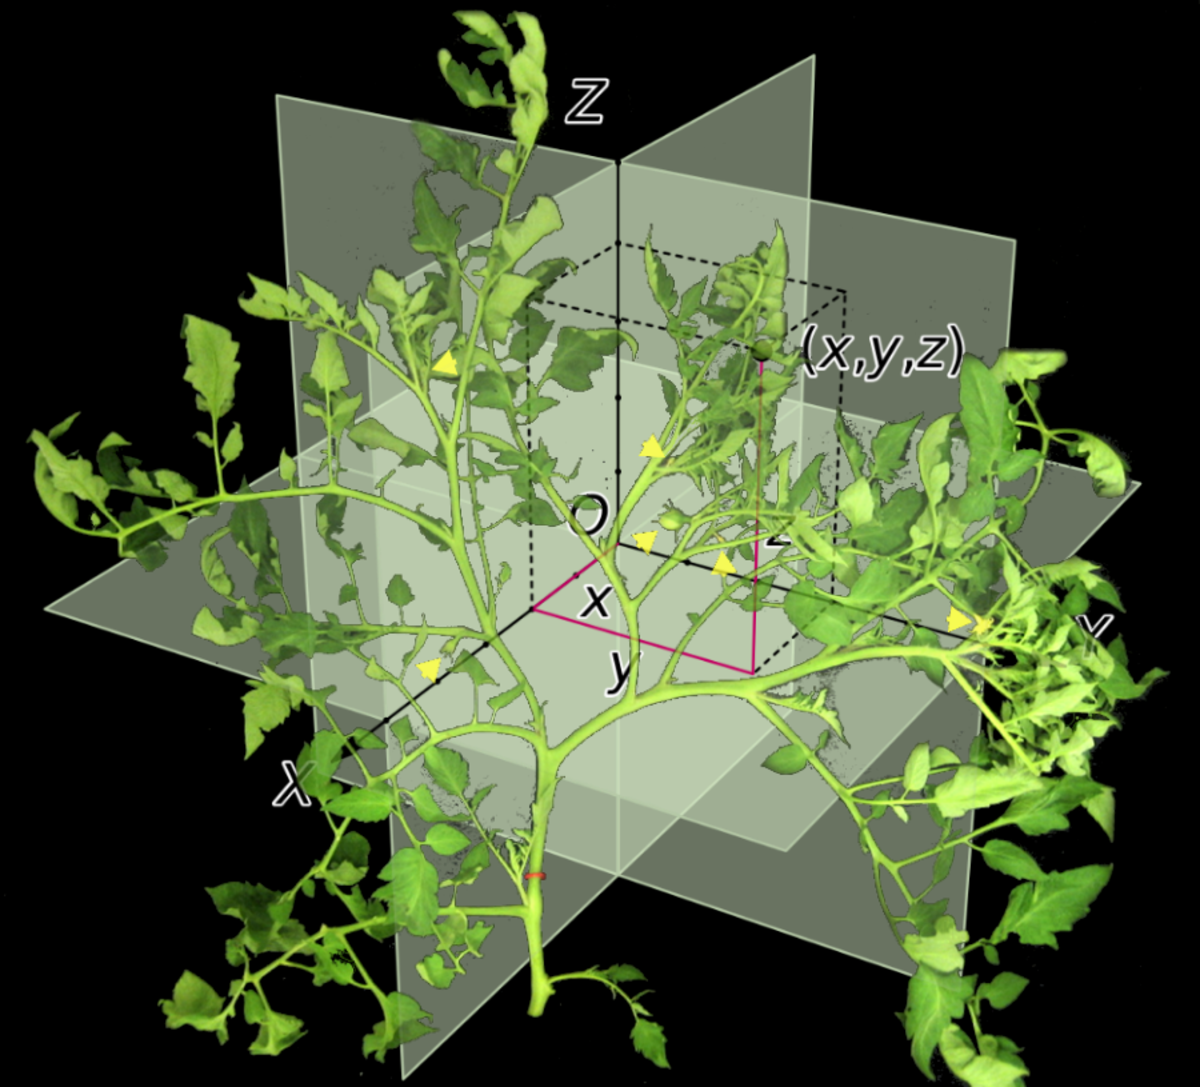 Picture of tomato plant branching in Euclidean space, derived by Robert Kernodle from various open source images. 